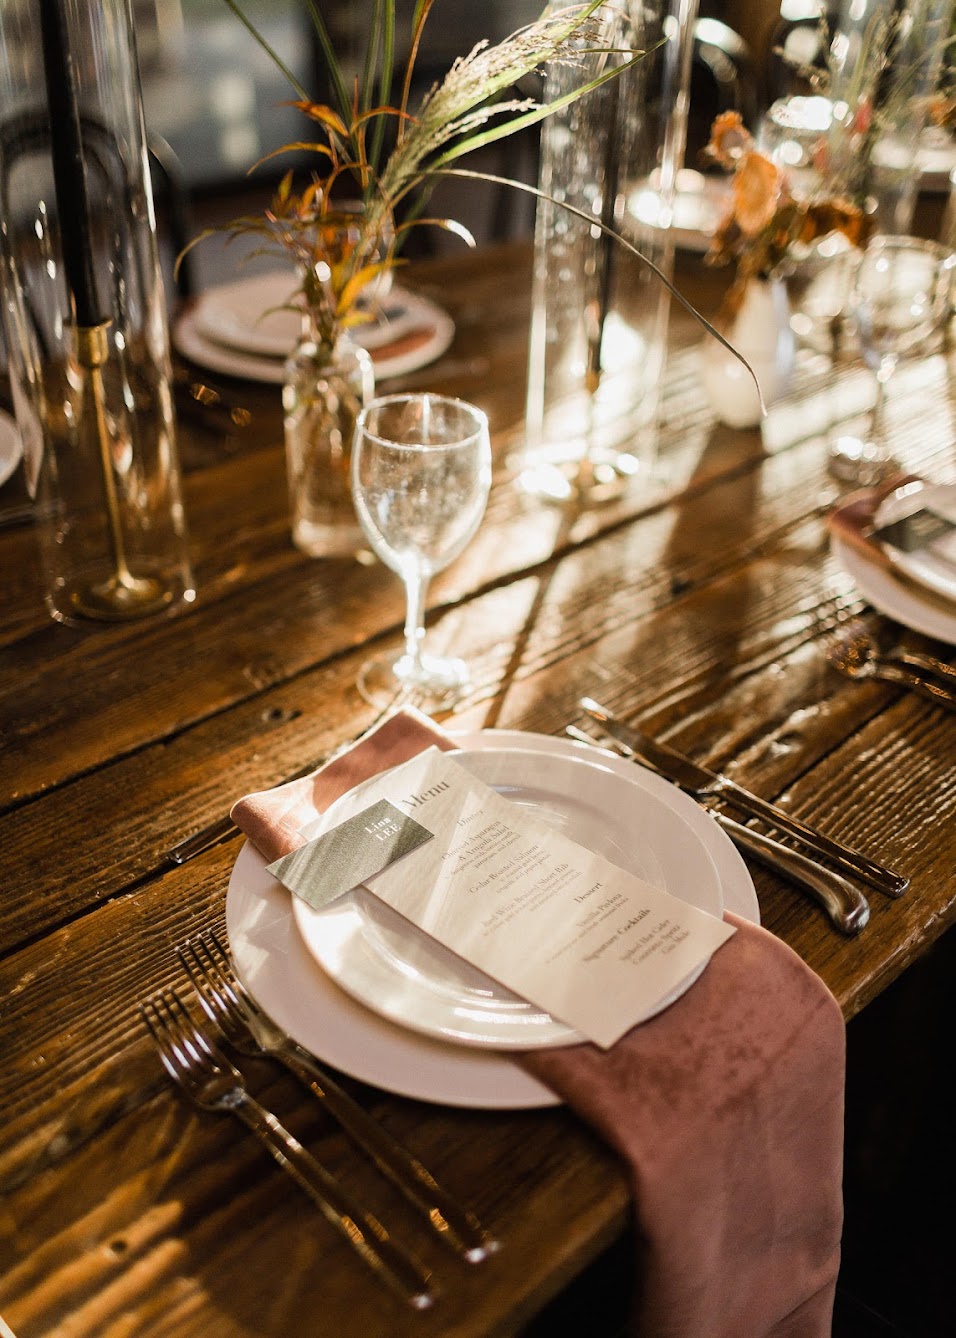 The place setting for guests. A velvet napkin sits between a dinner and salad plate. On top of the salad plate sits a dinner menu and a name card.